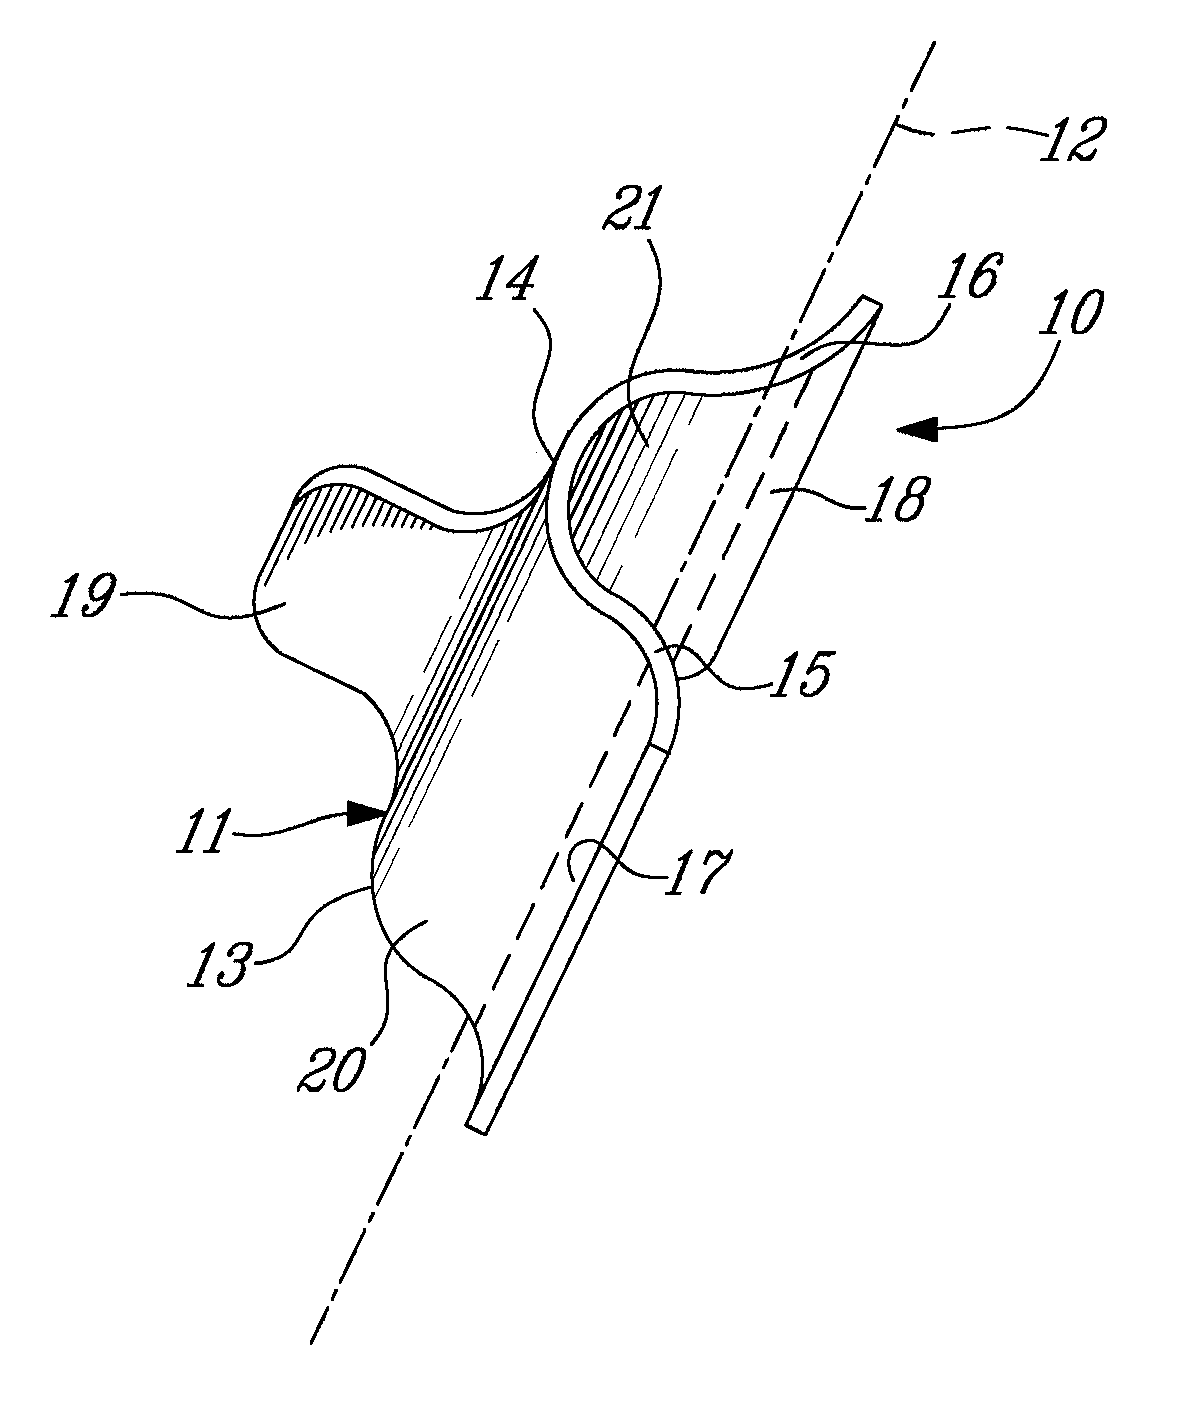 Spinal covering device